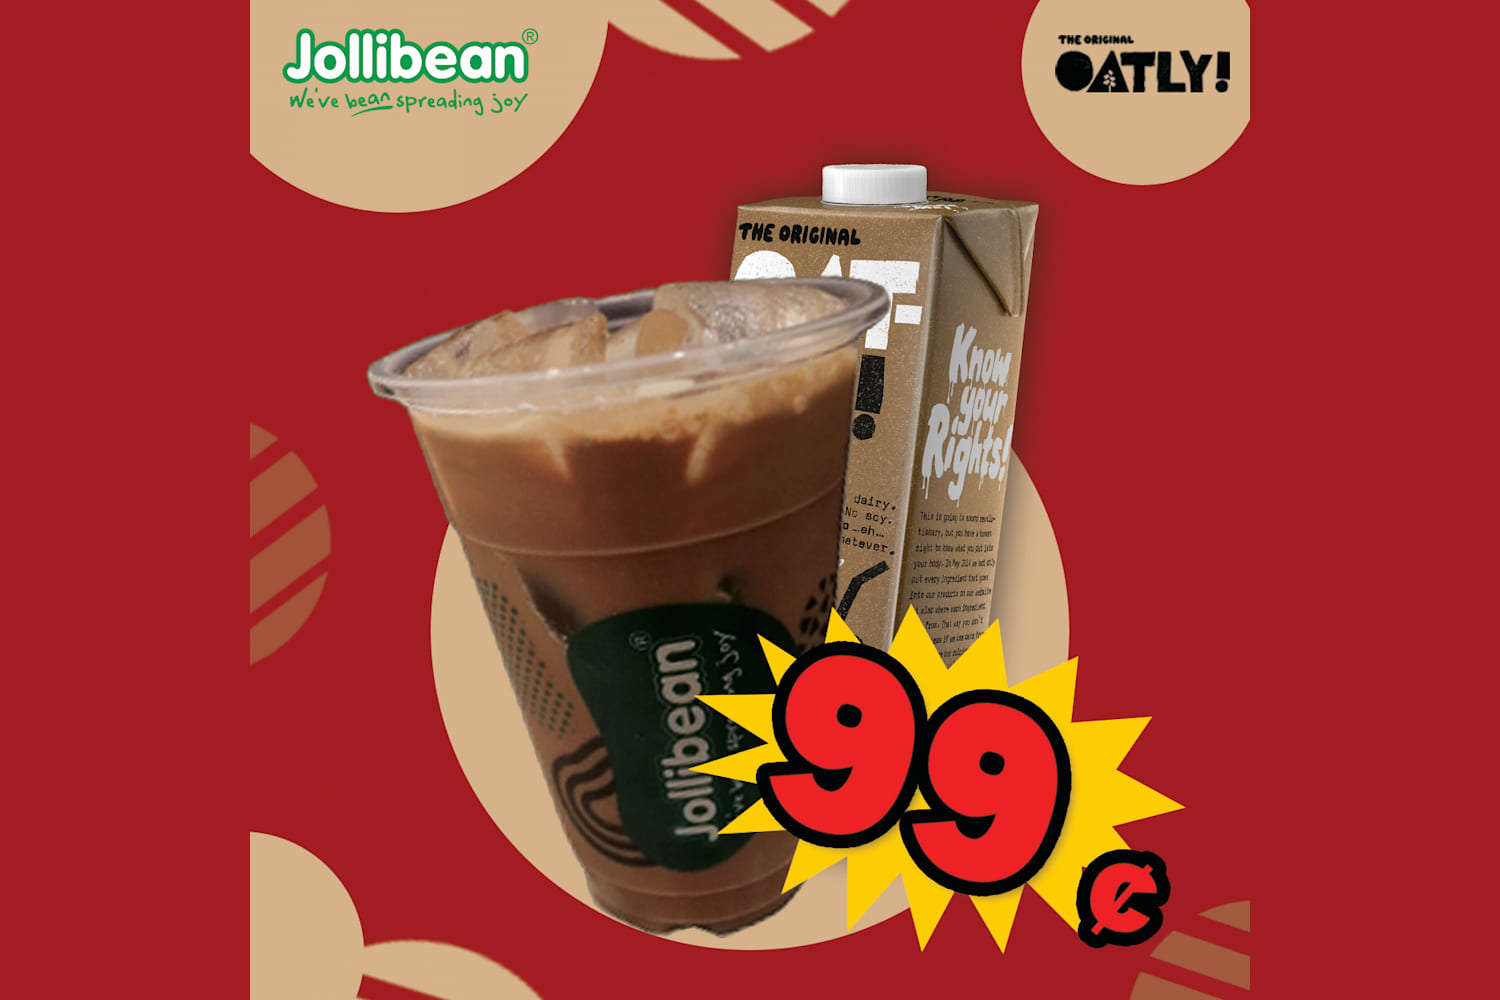 1 x Jollibean Iced Chocolate Oatly Drink [Limited Stock]